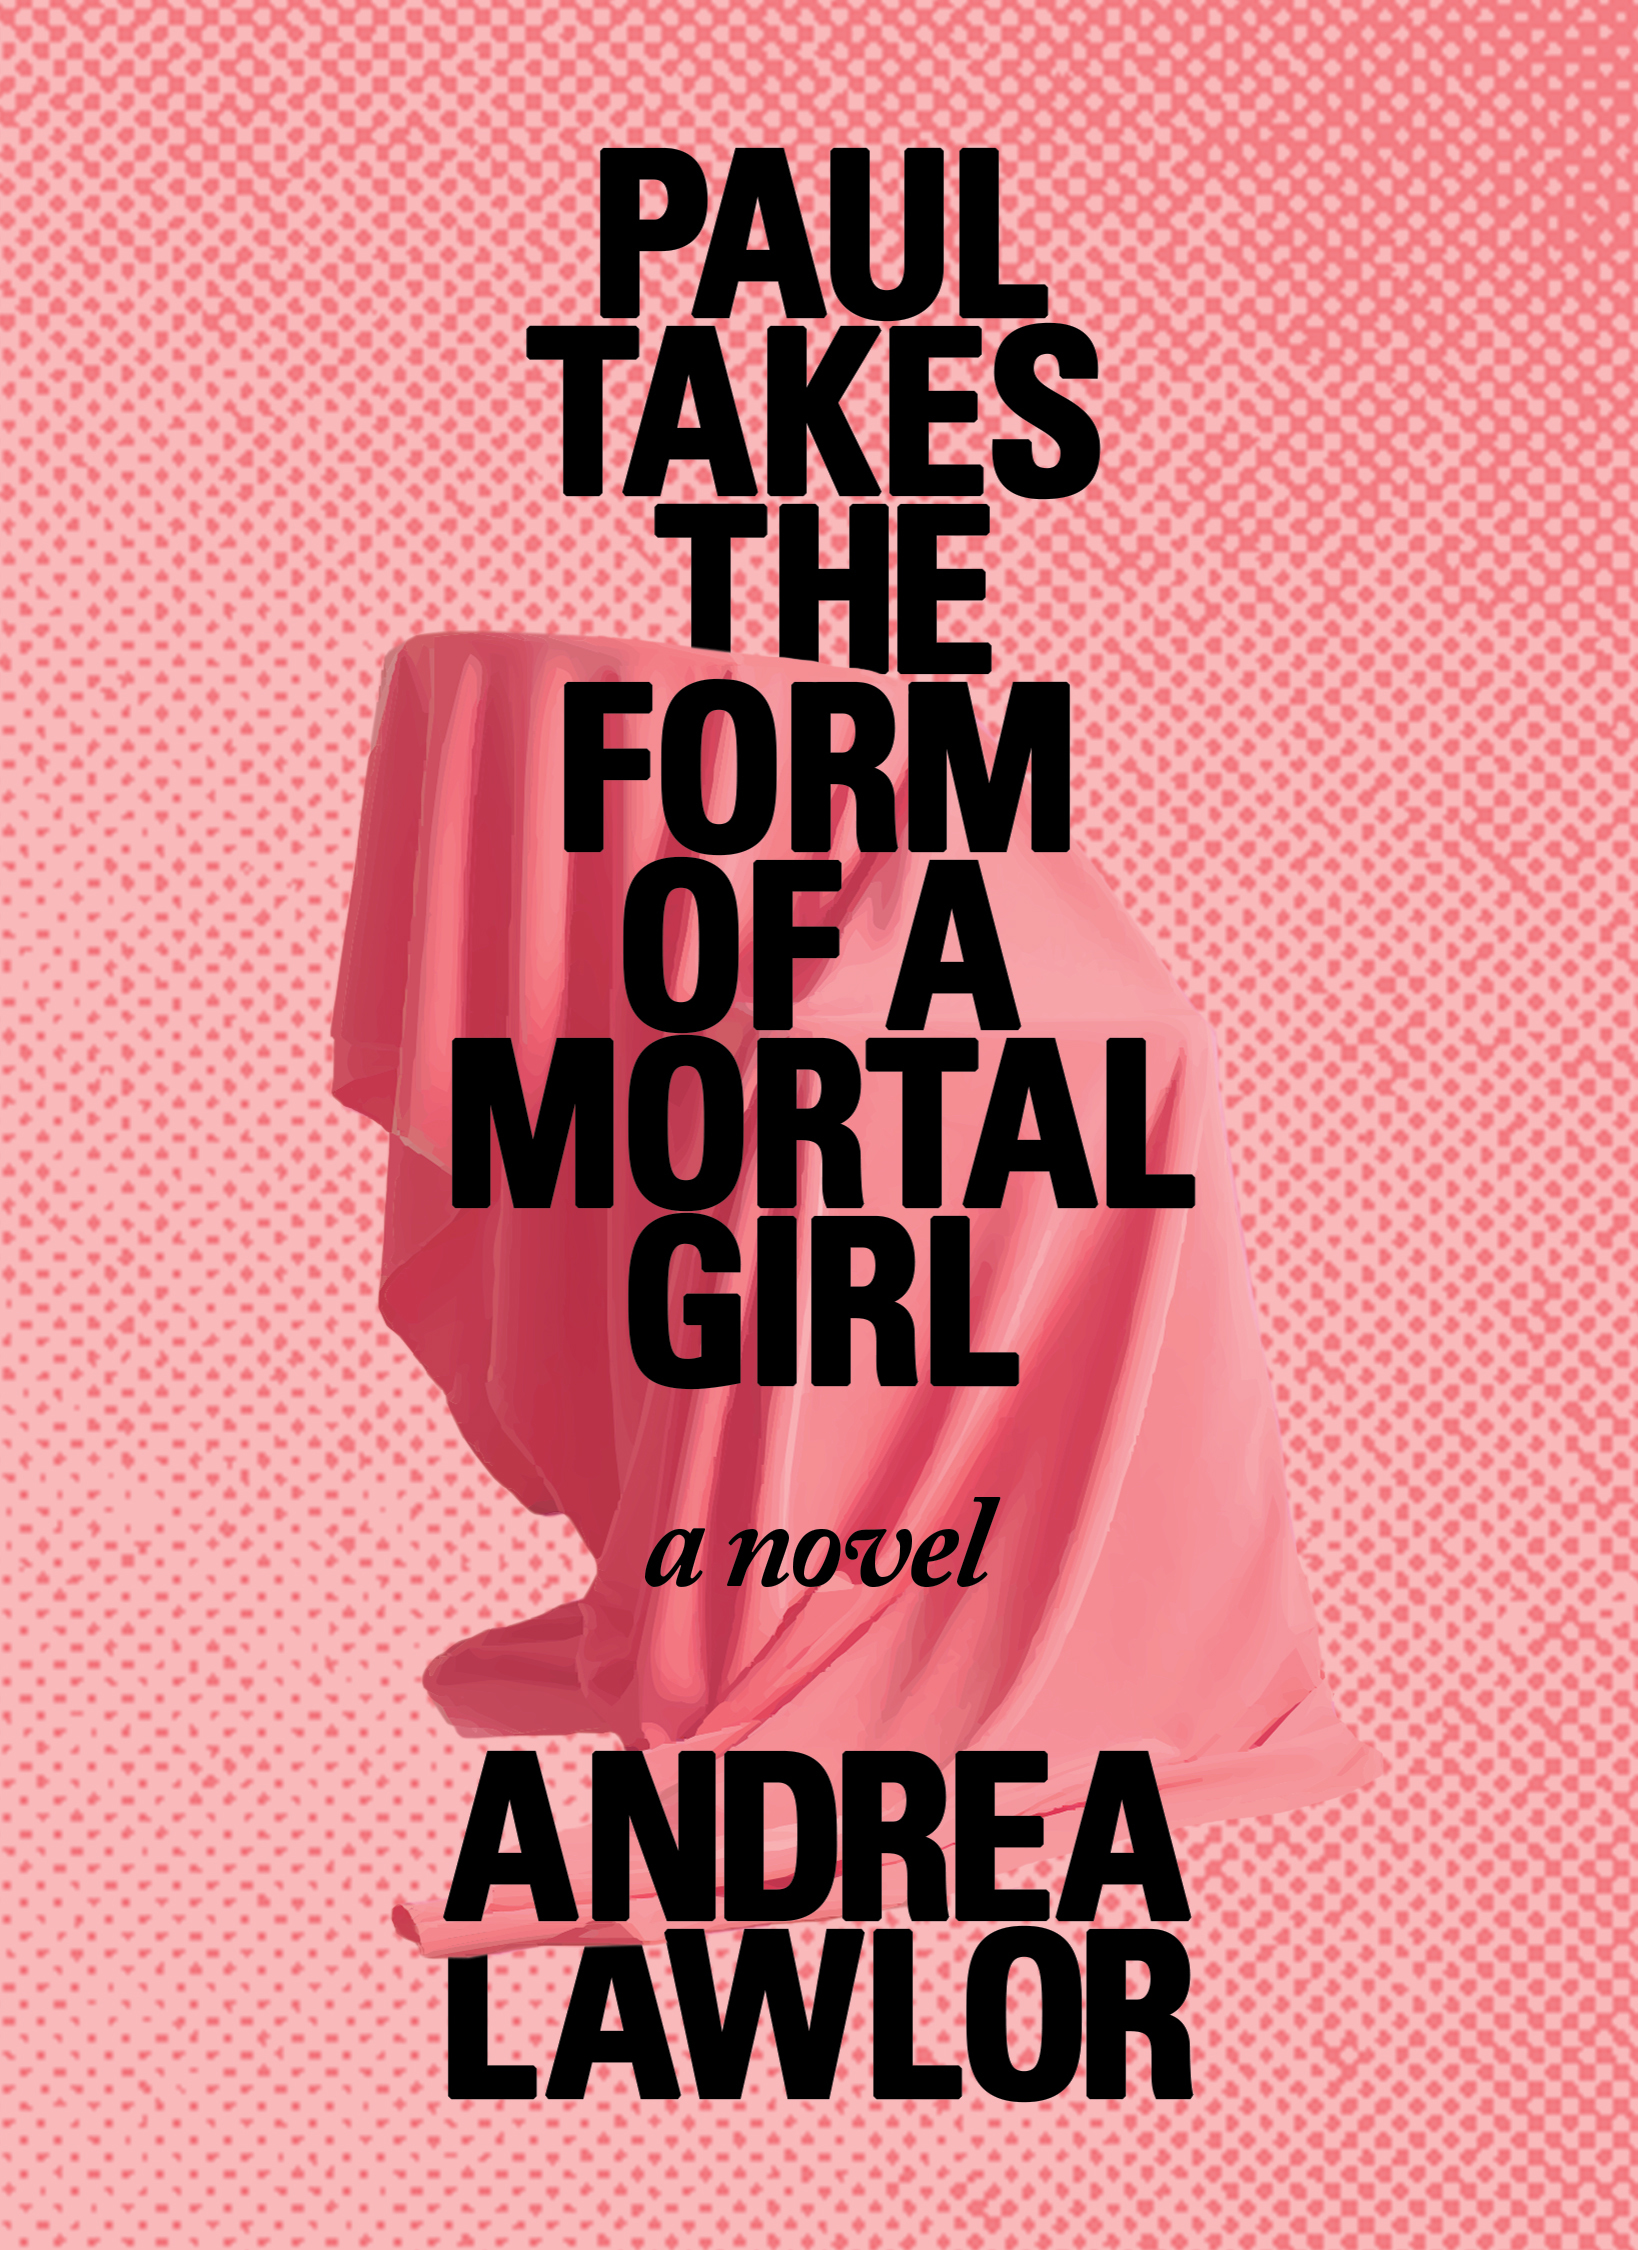 Andrea Lawlor: Paul takes the form of a mortal girl (2017)